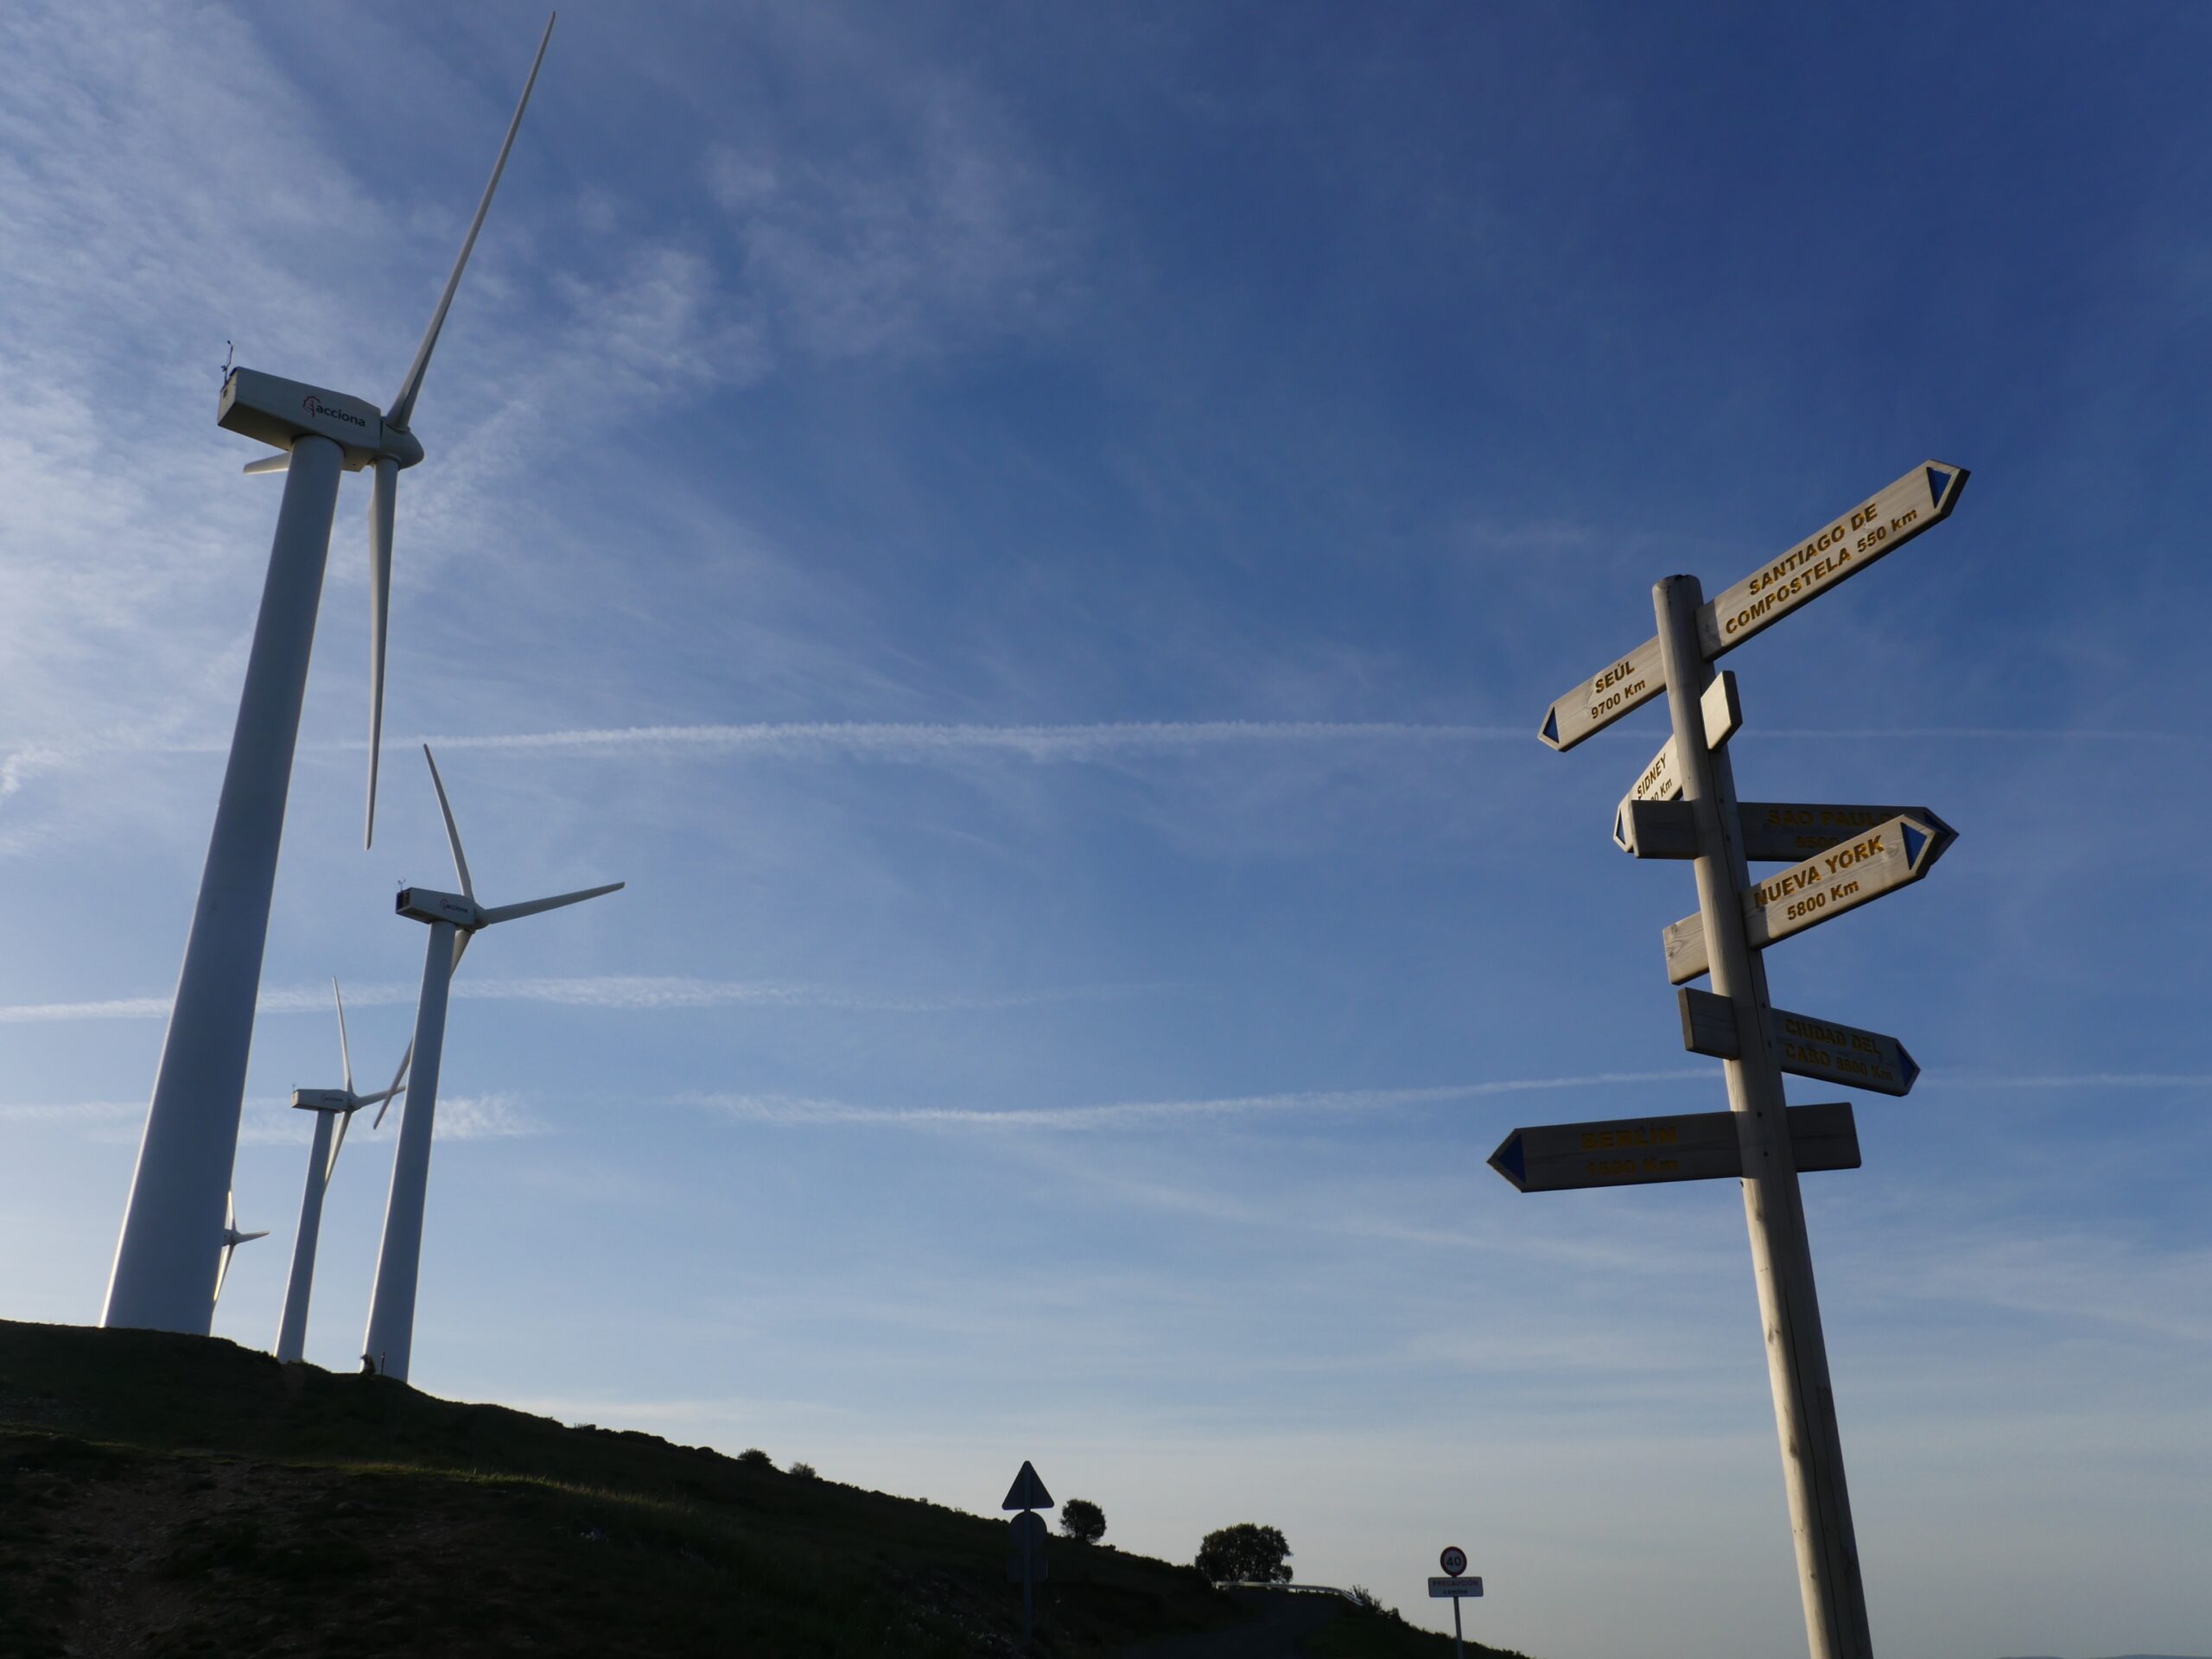 Signs point to the way to Santiago and other cities near windmills above Zariquiegui, Spain.